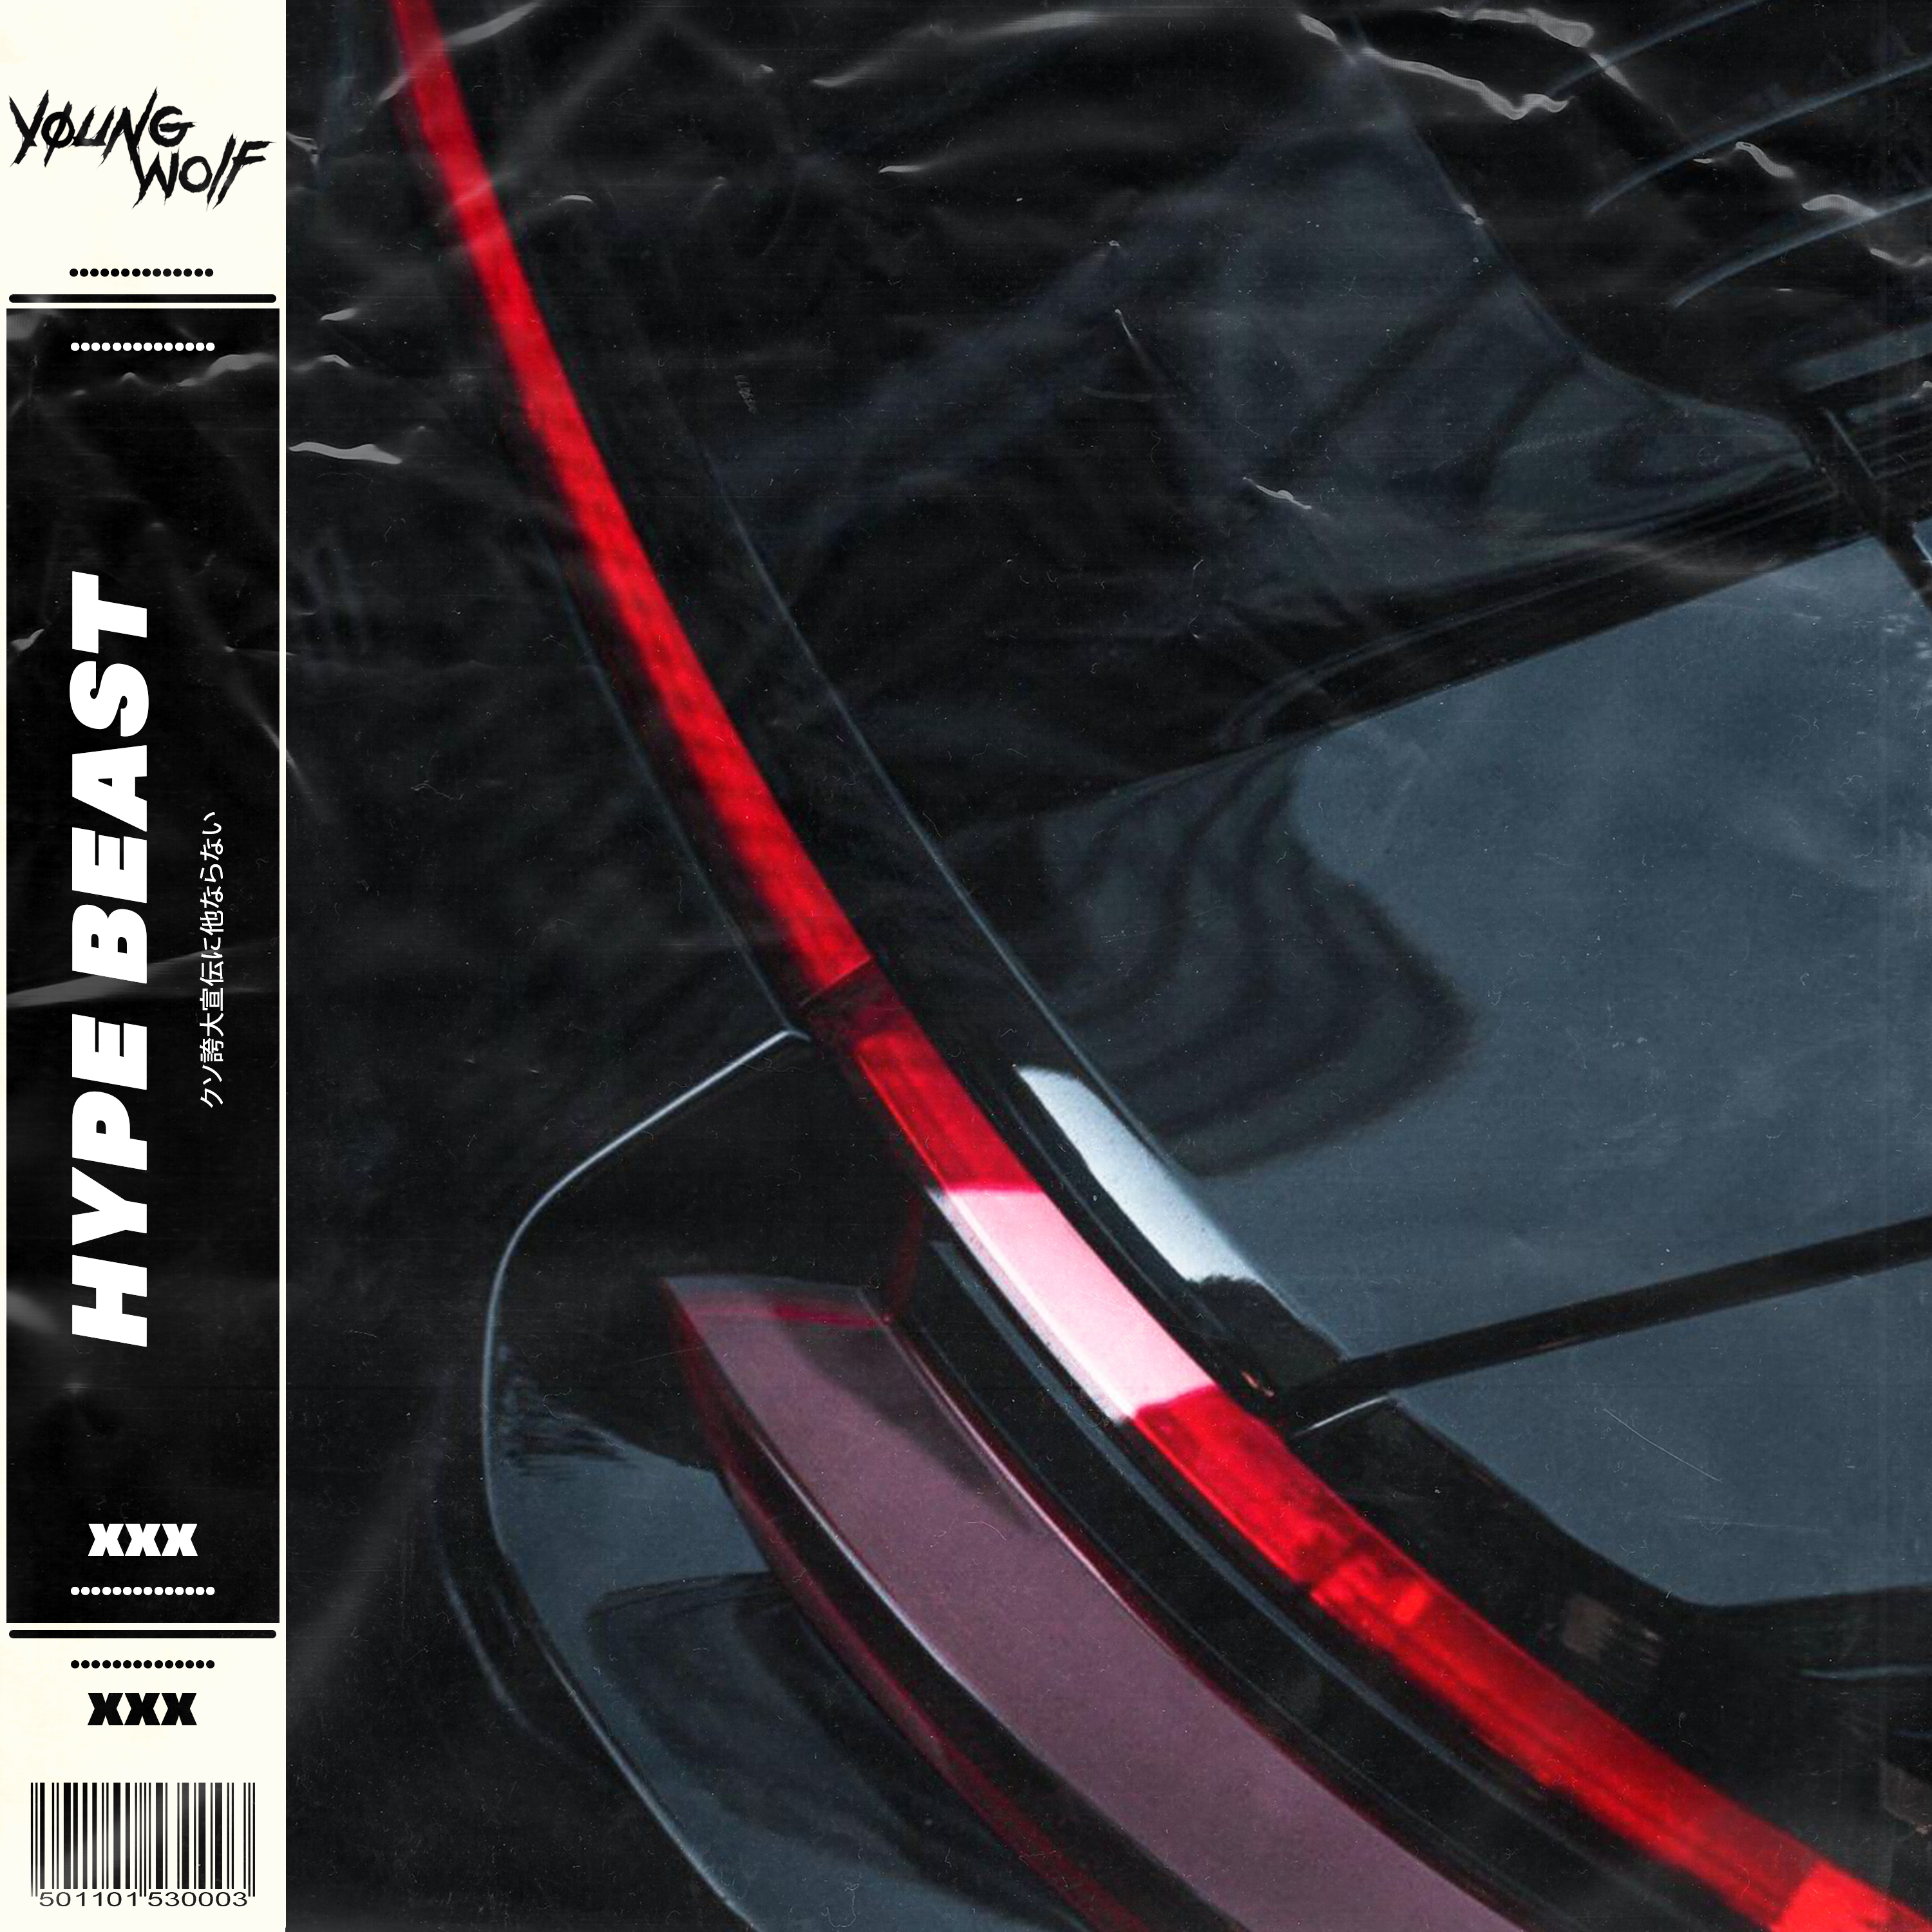 YoungWolf Shares Hyphy New Single “Hype Beast”